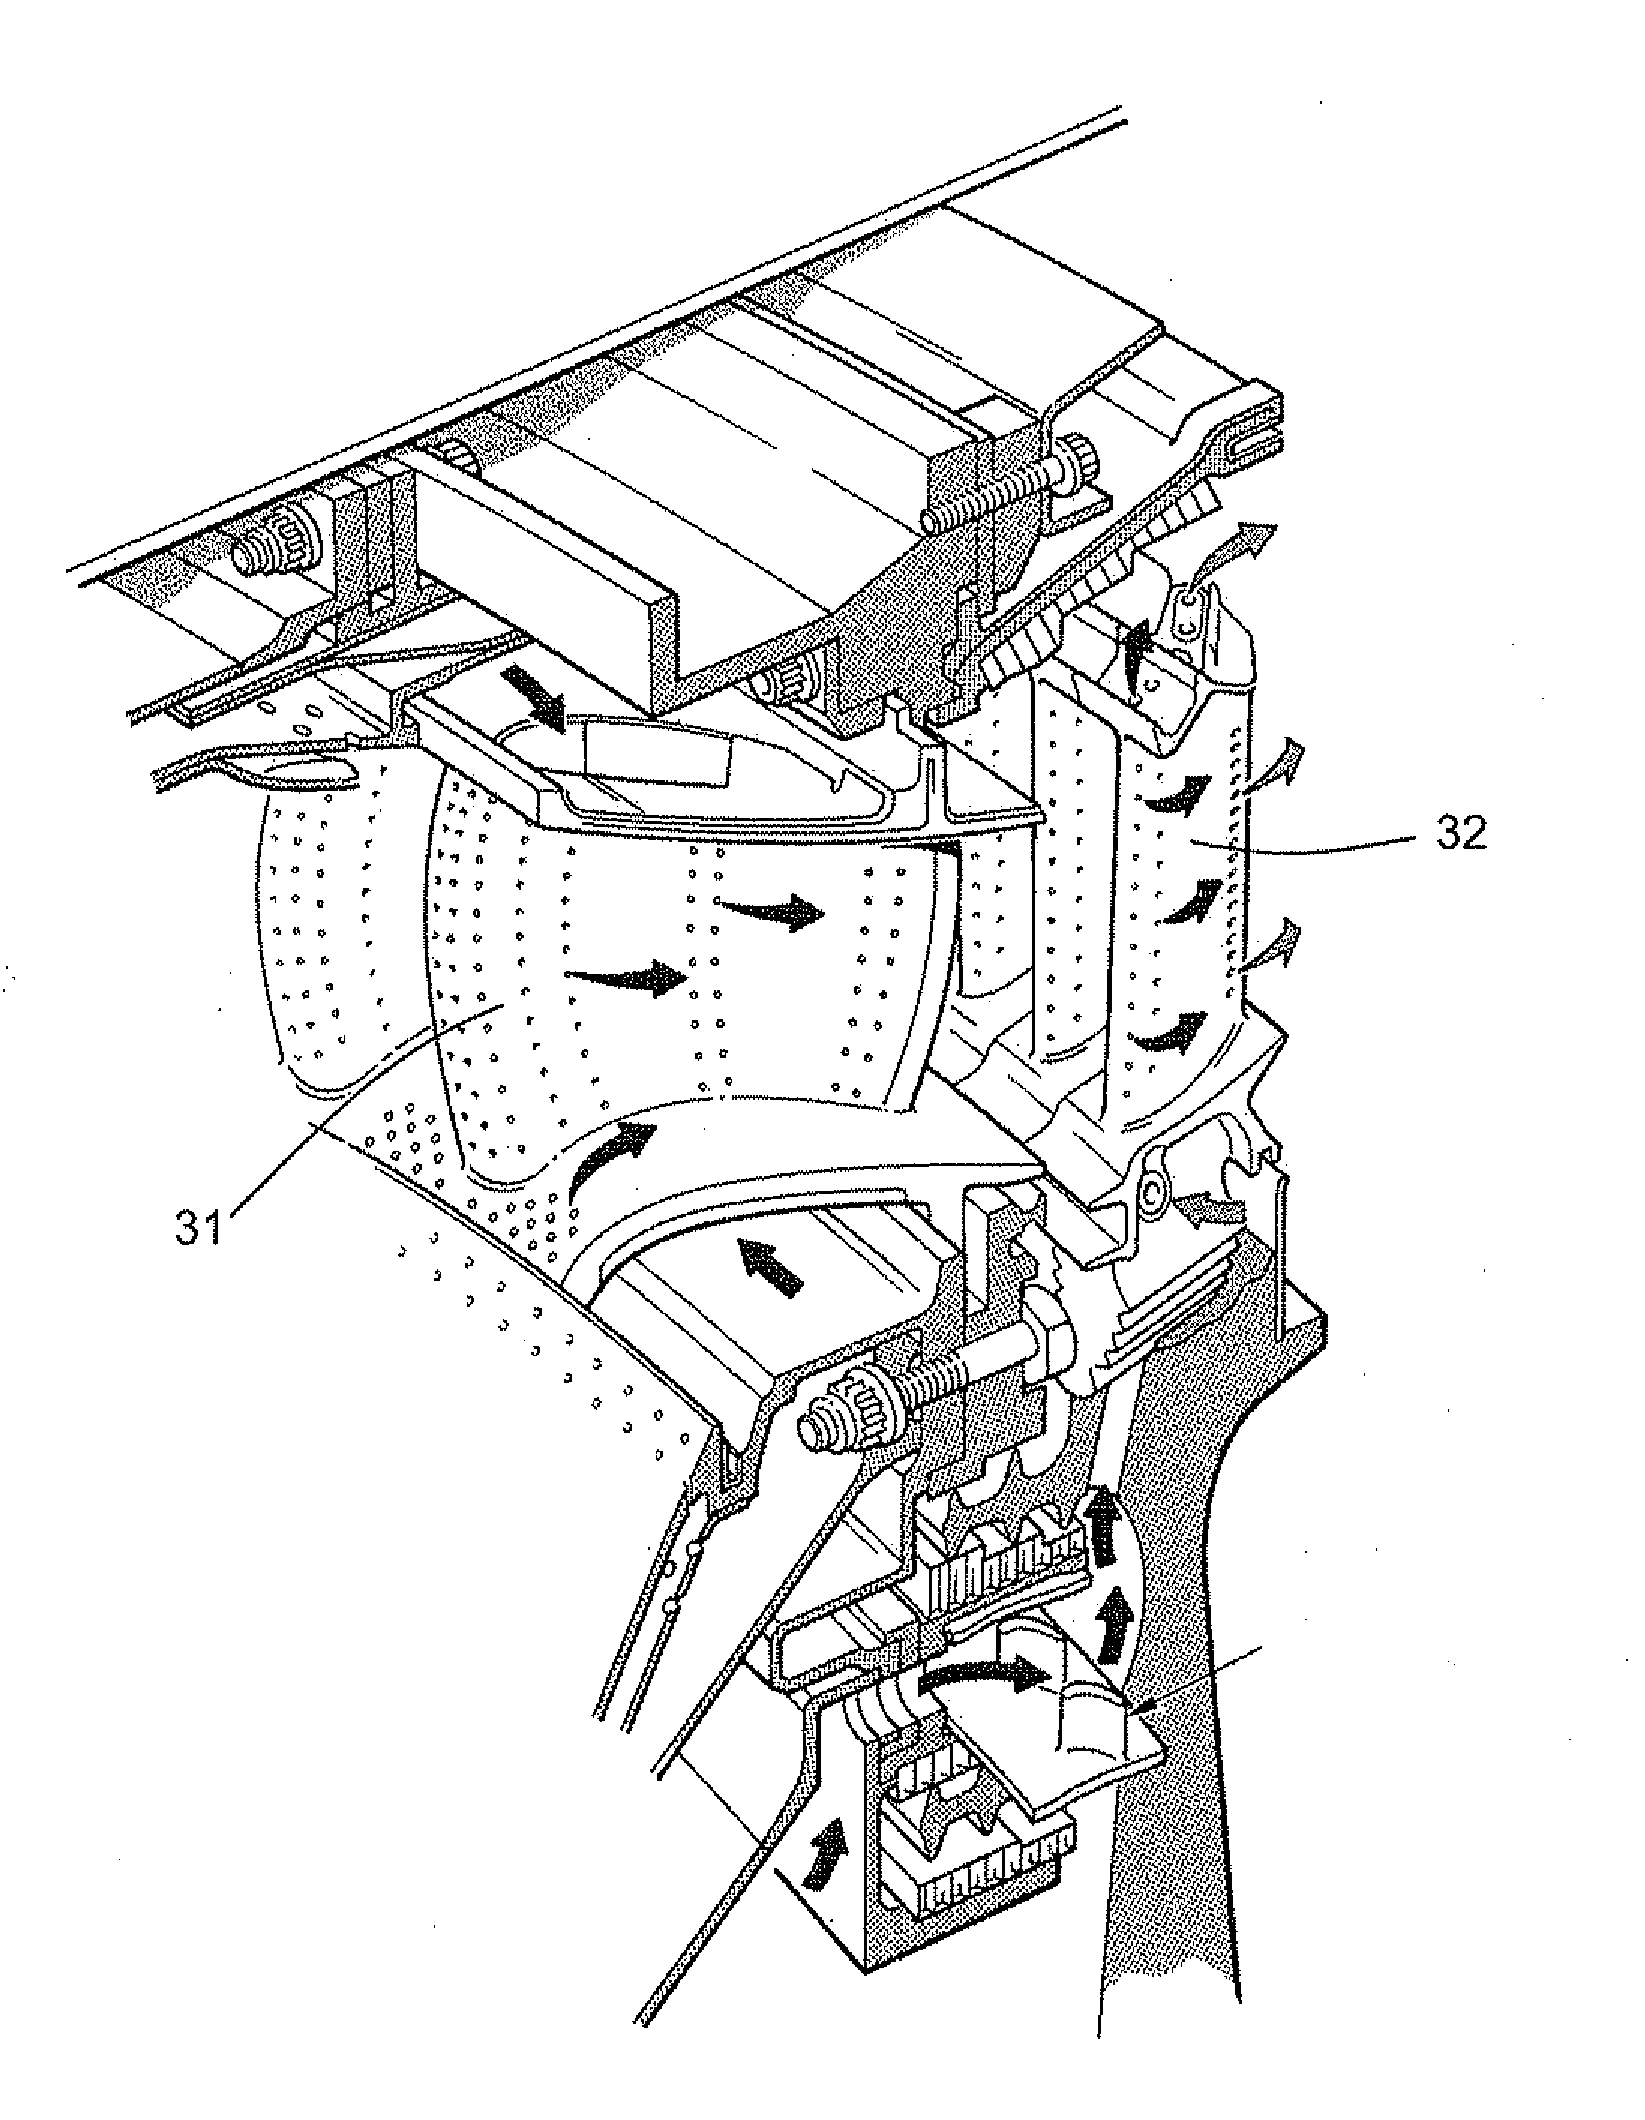 Effusion cooled shroud segment with an abradable system